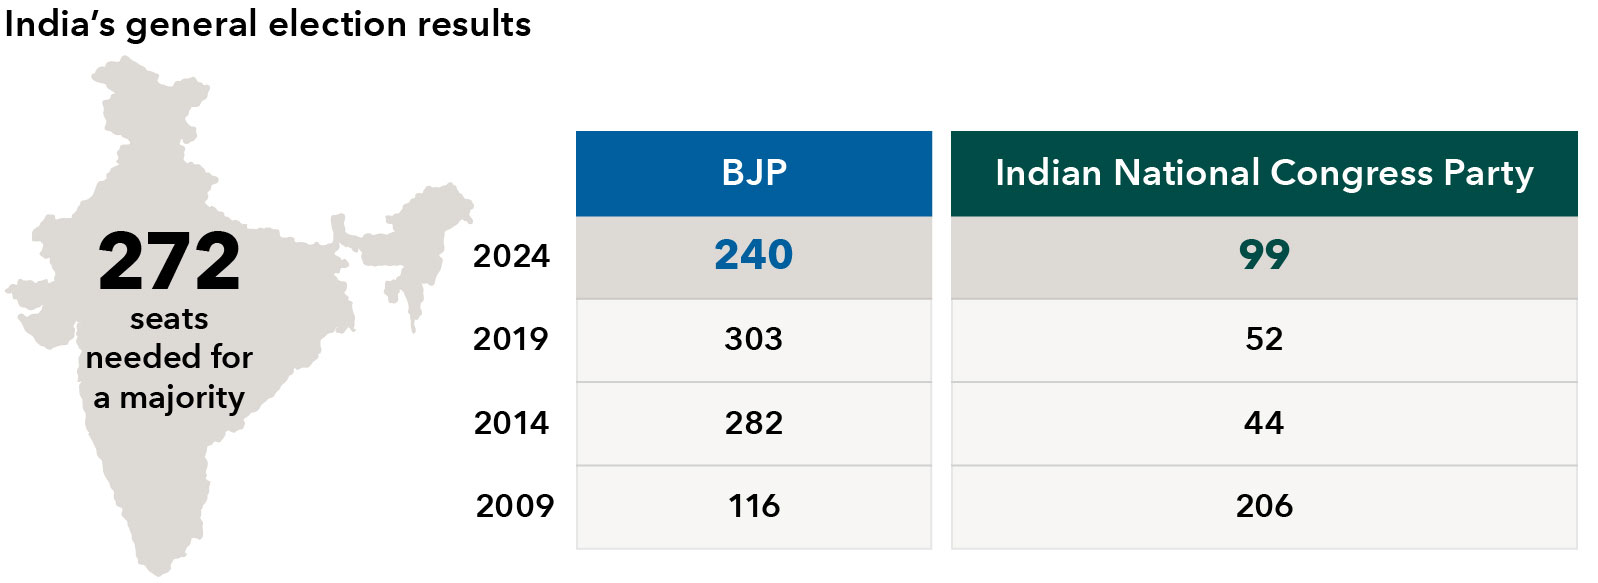 This table compares the Bharatiya Janata Party (BJP) and the Indian National Congress party parliamentary results from 2009 to 2024 in four Indian general elections. It shows the number of seats won by each party. The table highlights that 272 seats are needed for a majority. The BJP’s seat counts were: 116 in 2009, 282 in 2014, 303 in 2019, and 240 in 2024. The Congress party’s seat counts were: 206 in 2009, 44 in 2014, 52 in 2019, and 99 in 2024. 